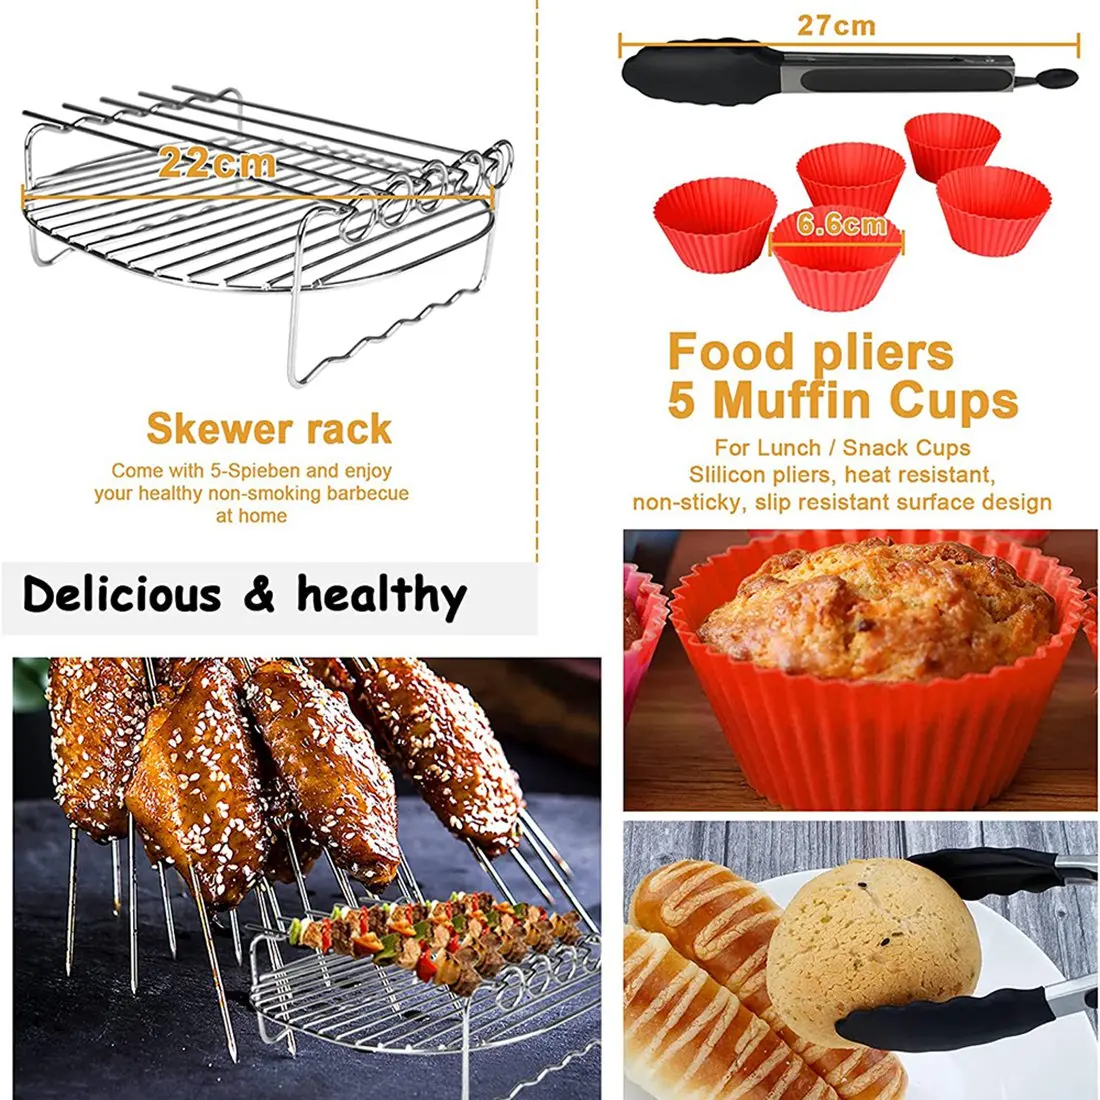 

Square Air Fryer Accessories 9 Inch, for Cosori Ninja Phillips Tower Pot Tefal Etc 5.6-7.5L Deep Basket Airfryer